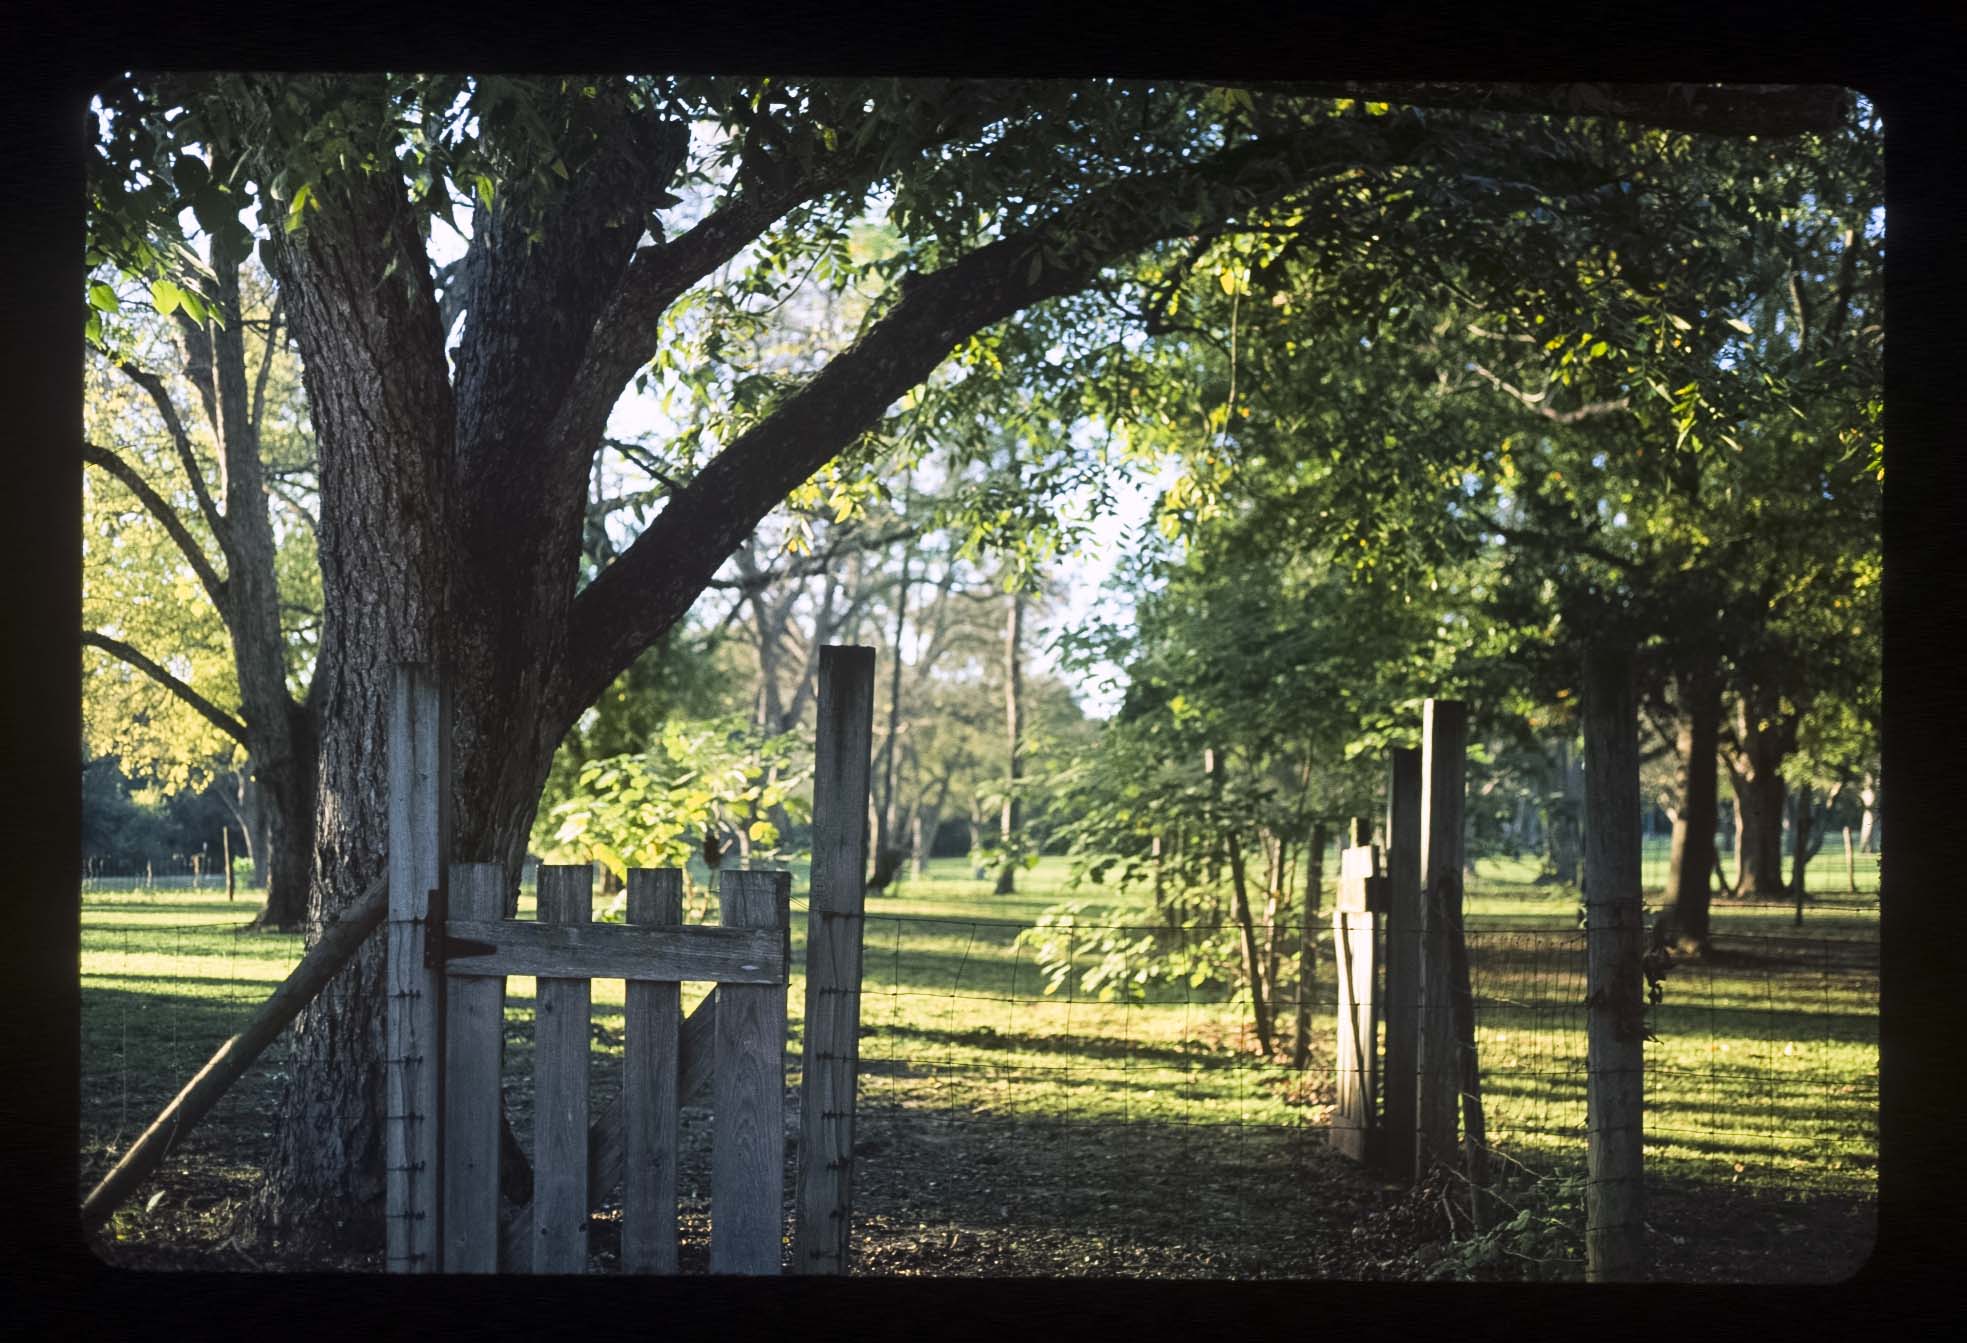 Trees enclosed by a wire fence and wooden gate